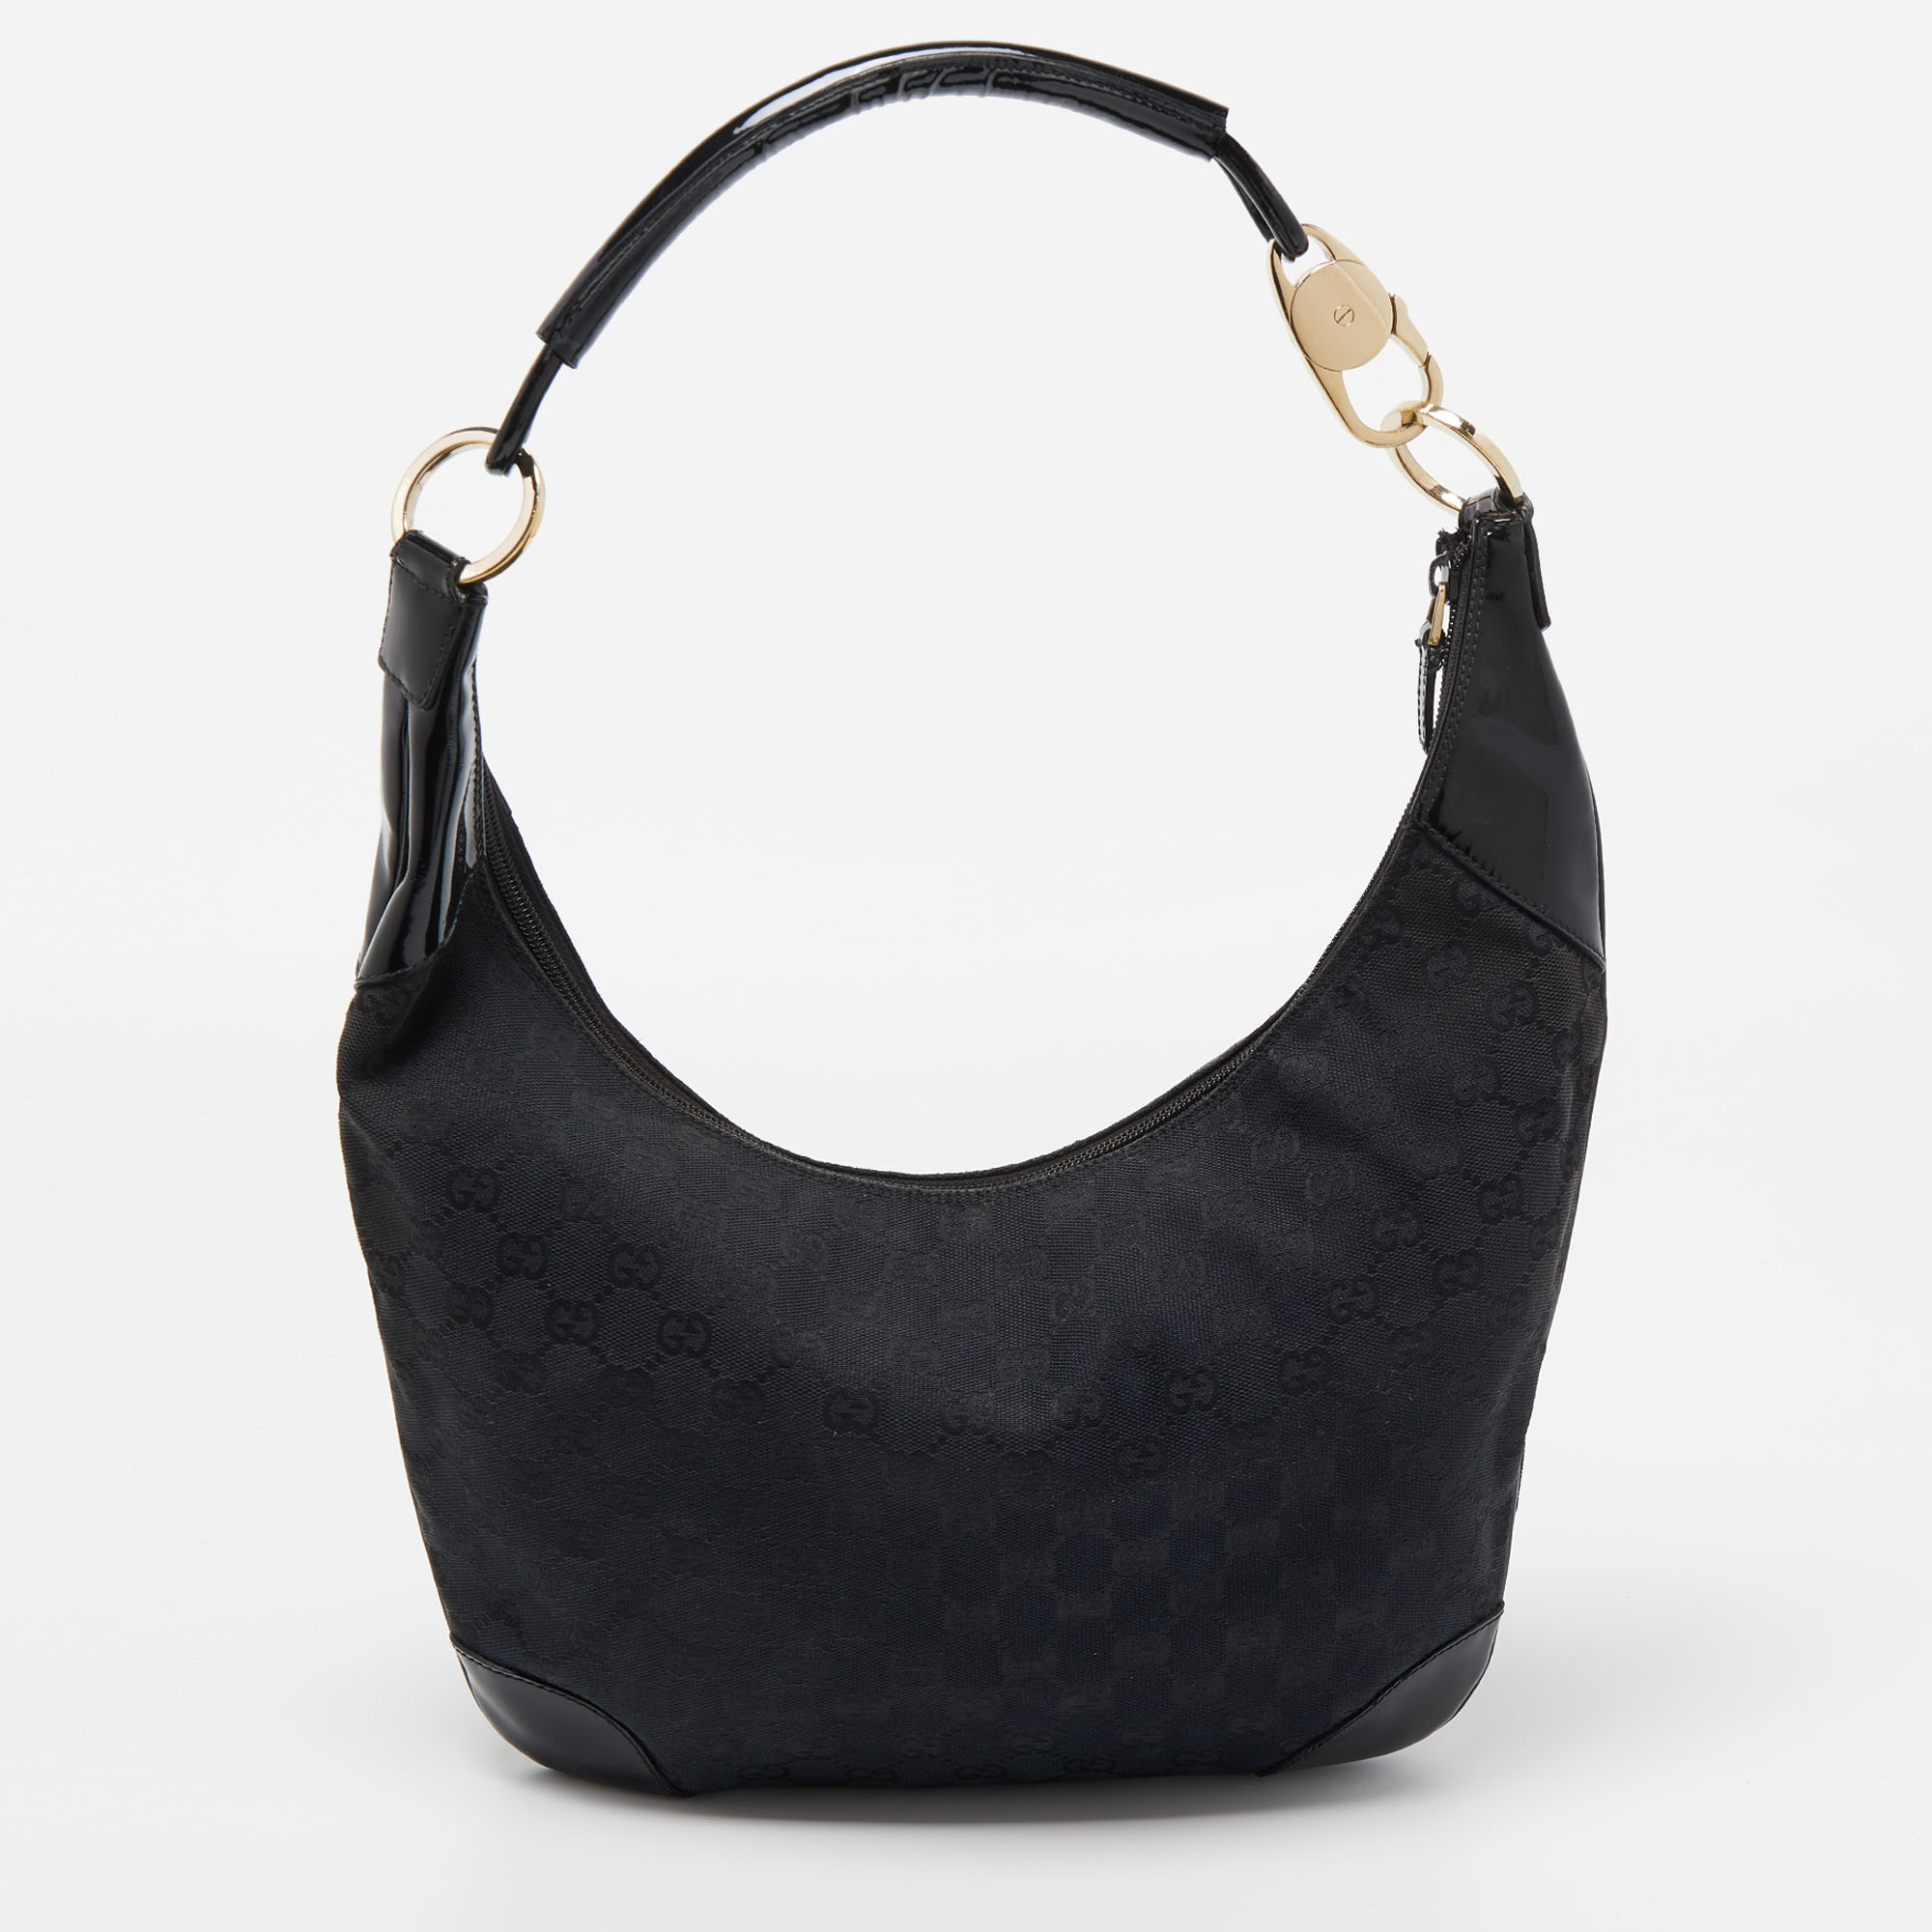 Gucci Black GG Canvas And Patent Leather Hobo